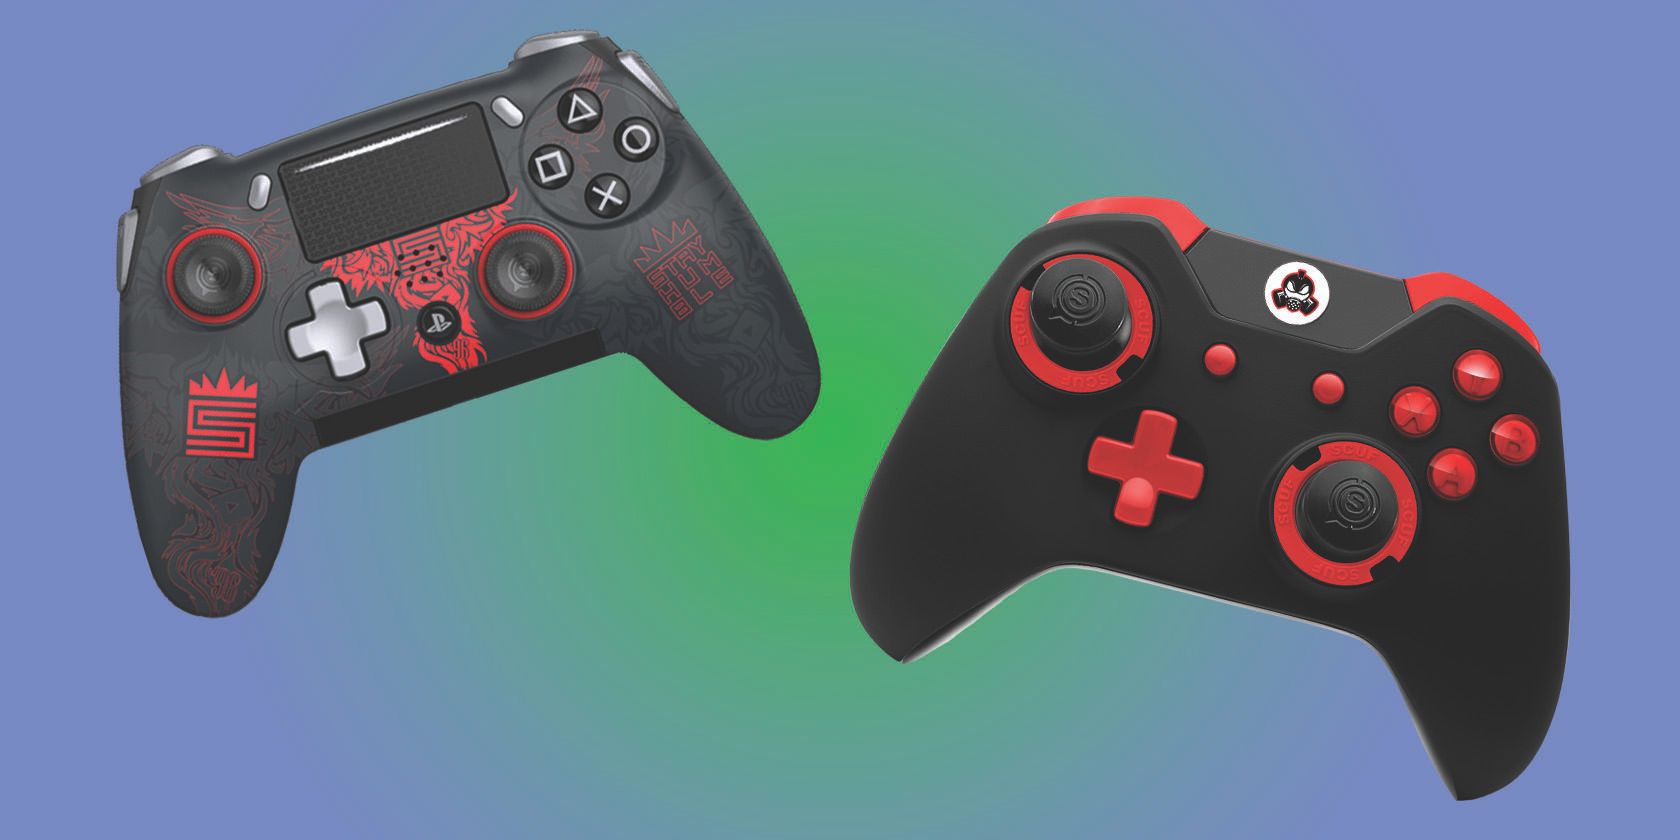 scuf controllers for PS4 and Xbox